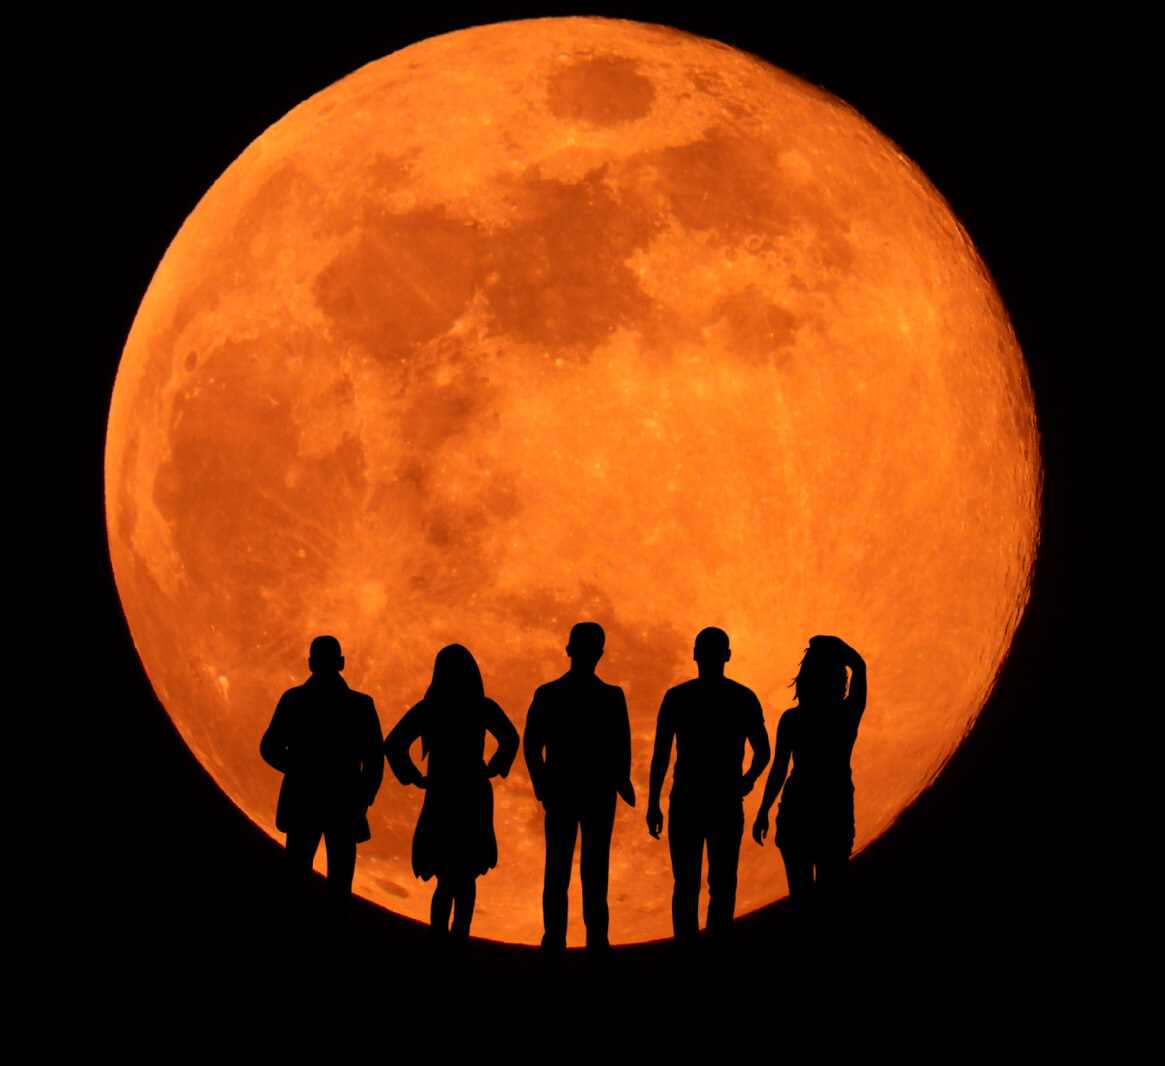 Silhouettes in an eclipsed moon